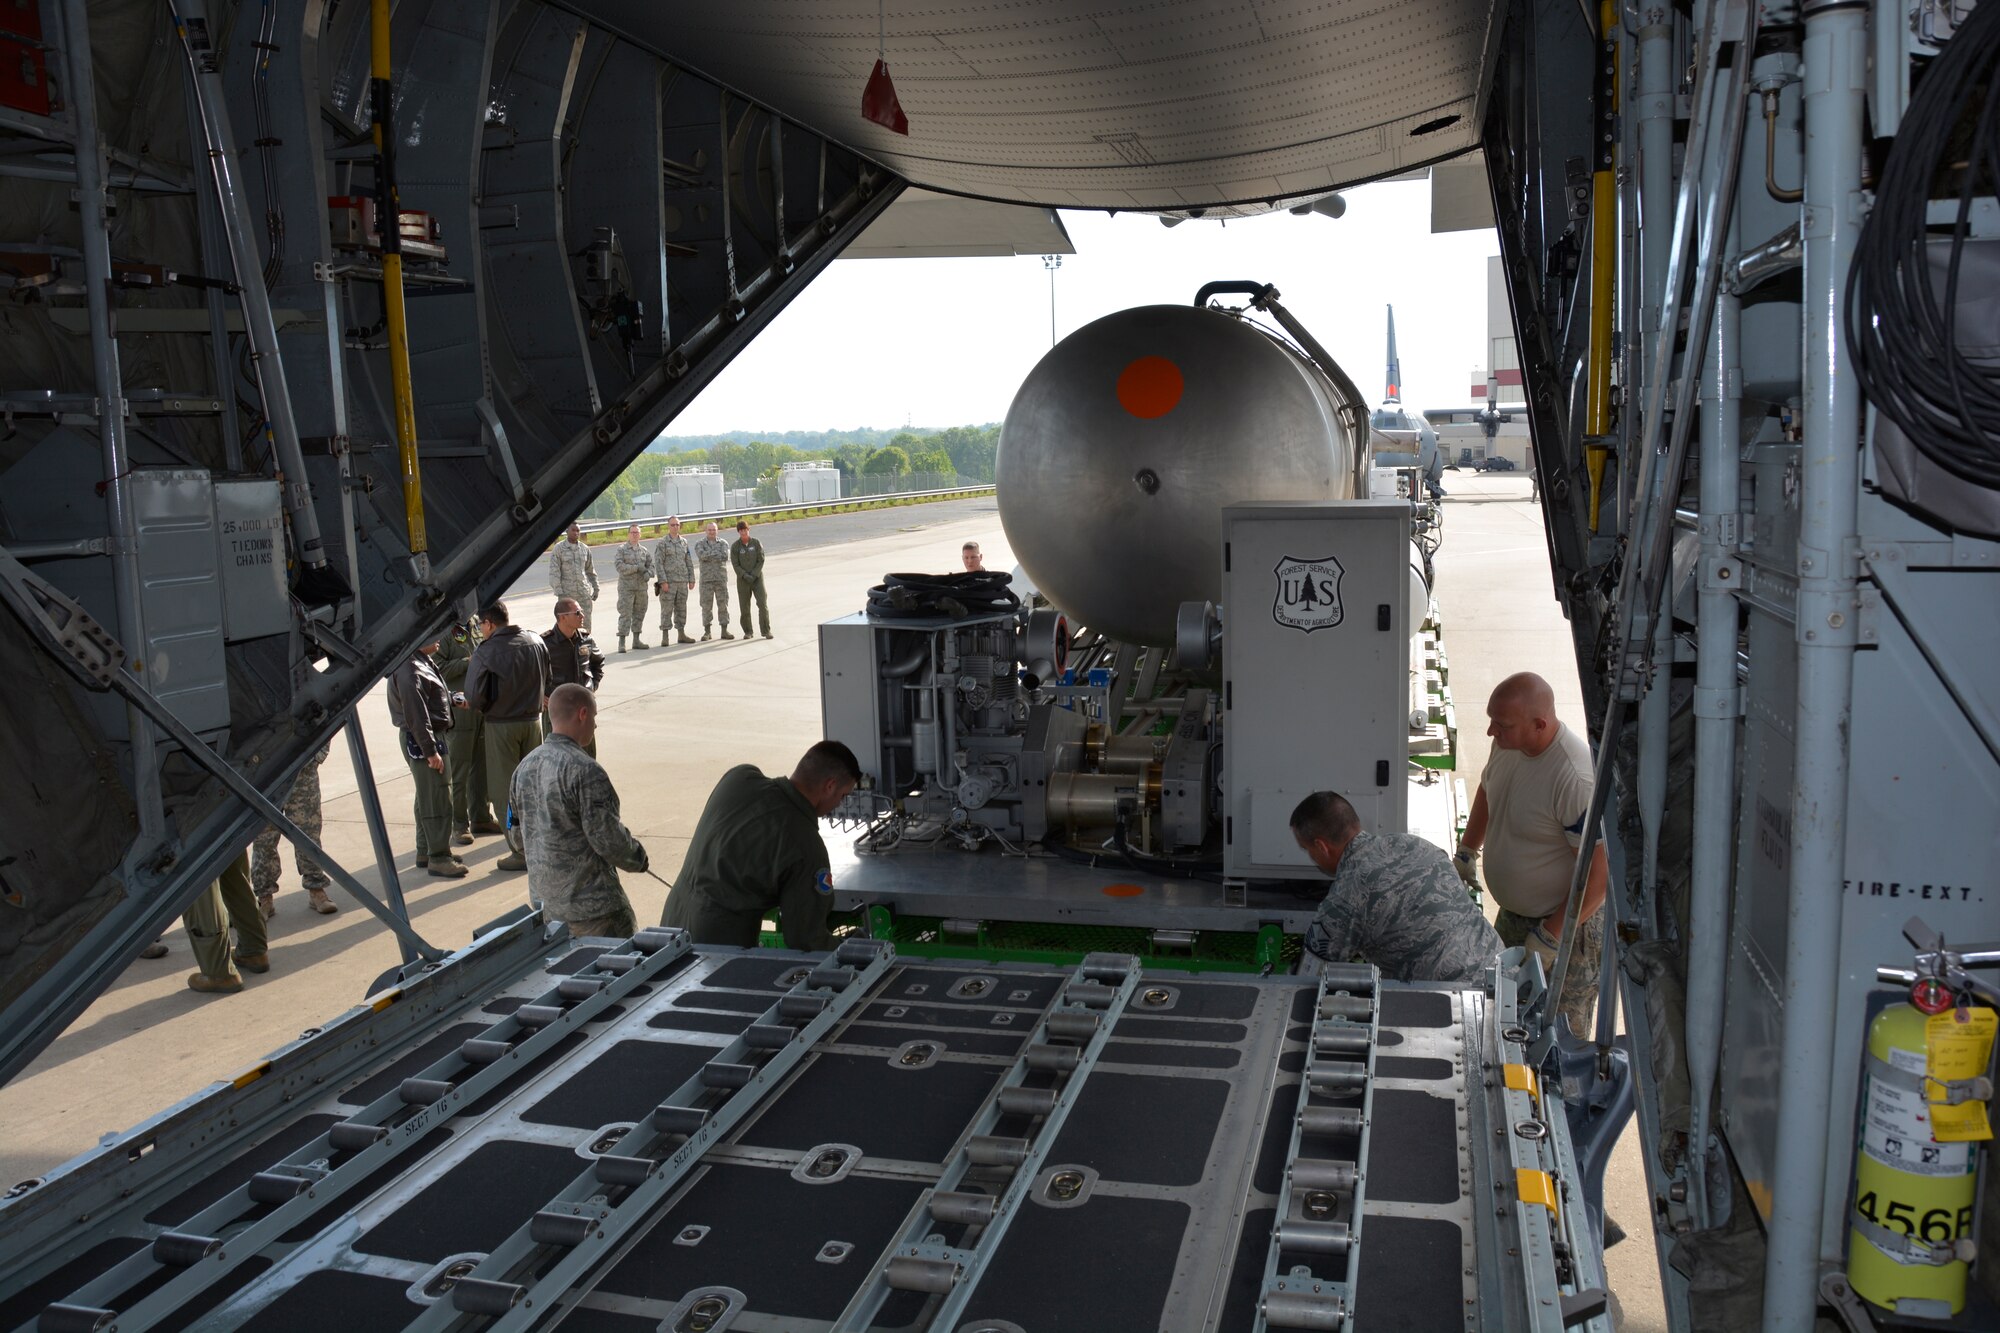 Senior aircrew instructors from the 81st, Escuadrón de Transporte, Bogota, Colombian Fuerza Aerea, were given a first-hand look at a Modular Airborne Firefighting System II (MAFFS II) being loaded into the cargo area of a C-130 Hercules aircraft by 145th Airlift Wing, aerial porters and maintainers at the North Carolina Air National Guard Base, Charlotte Douglas International Airport; April 29, 2015. The Colombians were visiting the NCANG during MAFFS 2015 annual training to gain insight on how aerial firefighting is planned, prepared for and executed. (U.S. Air National Guard photo by Master Sgt. Patricia F. Moran, 145th Public Affairs/Released)